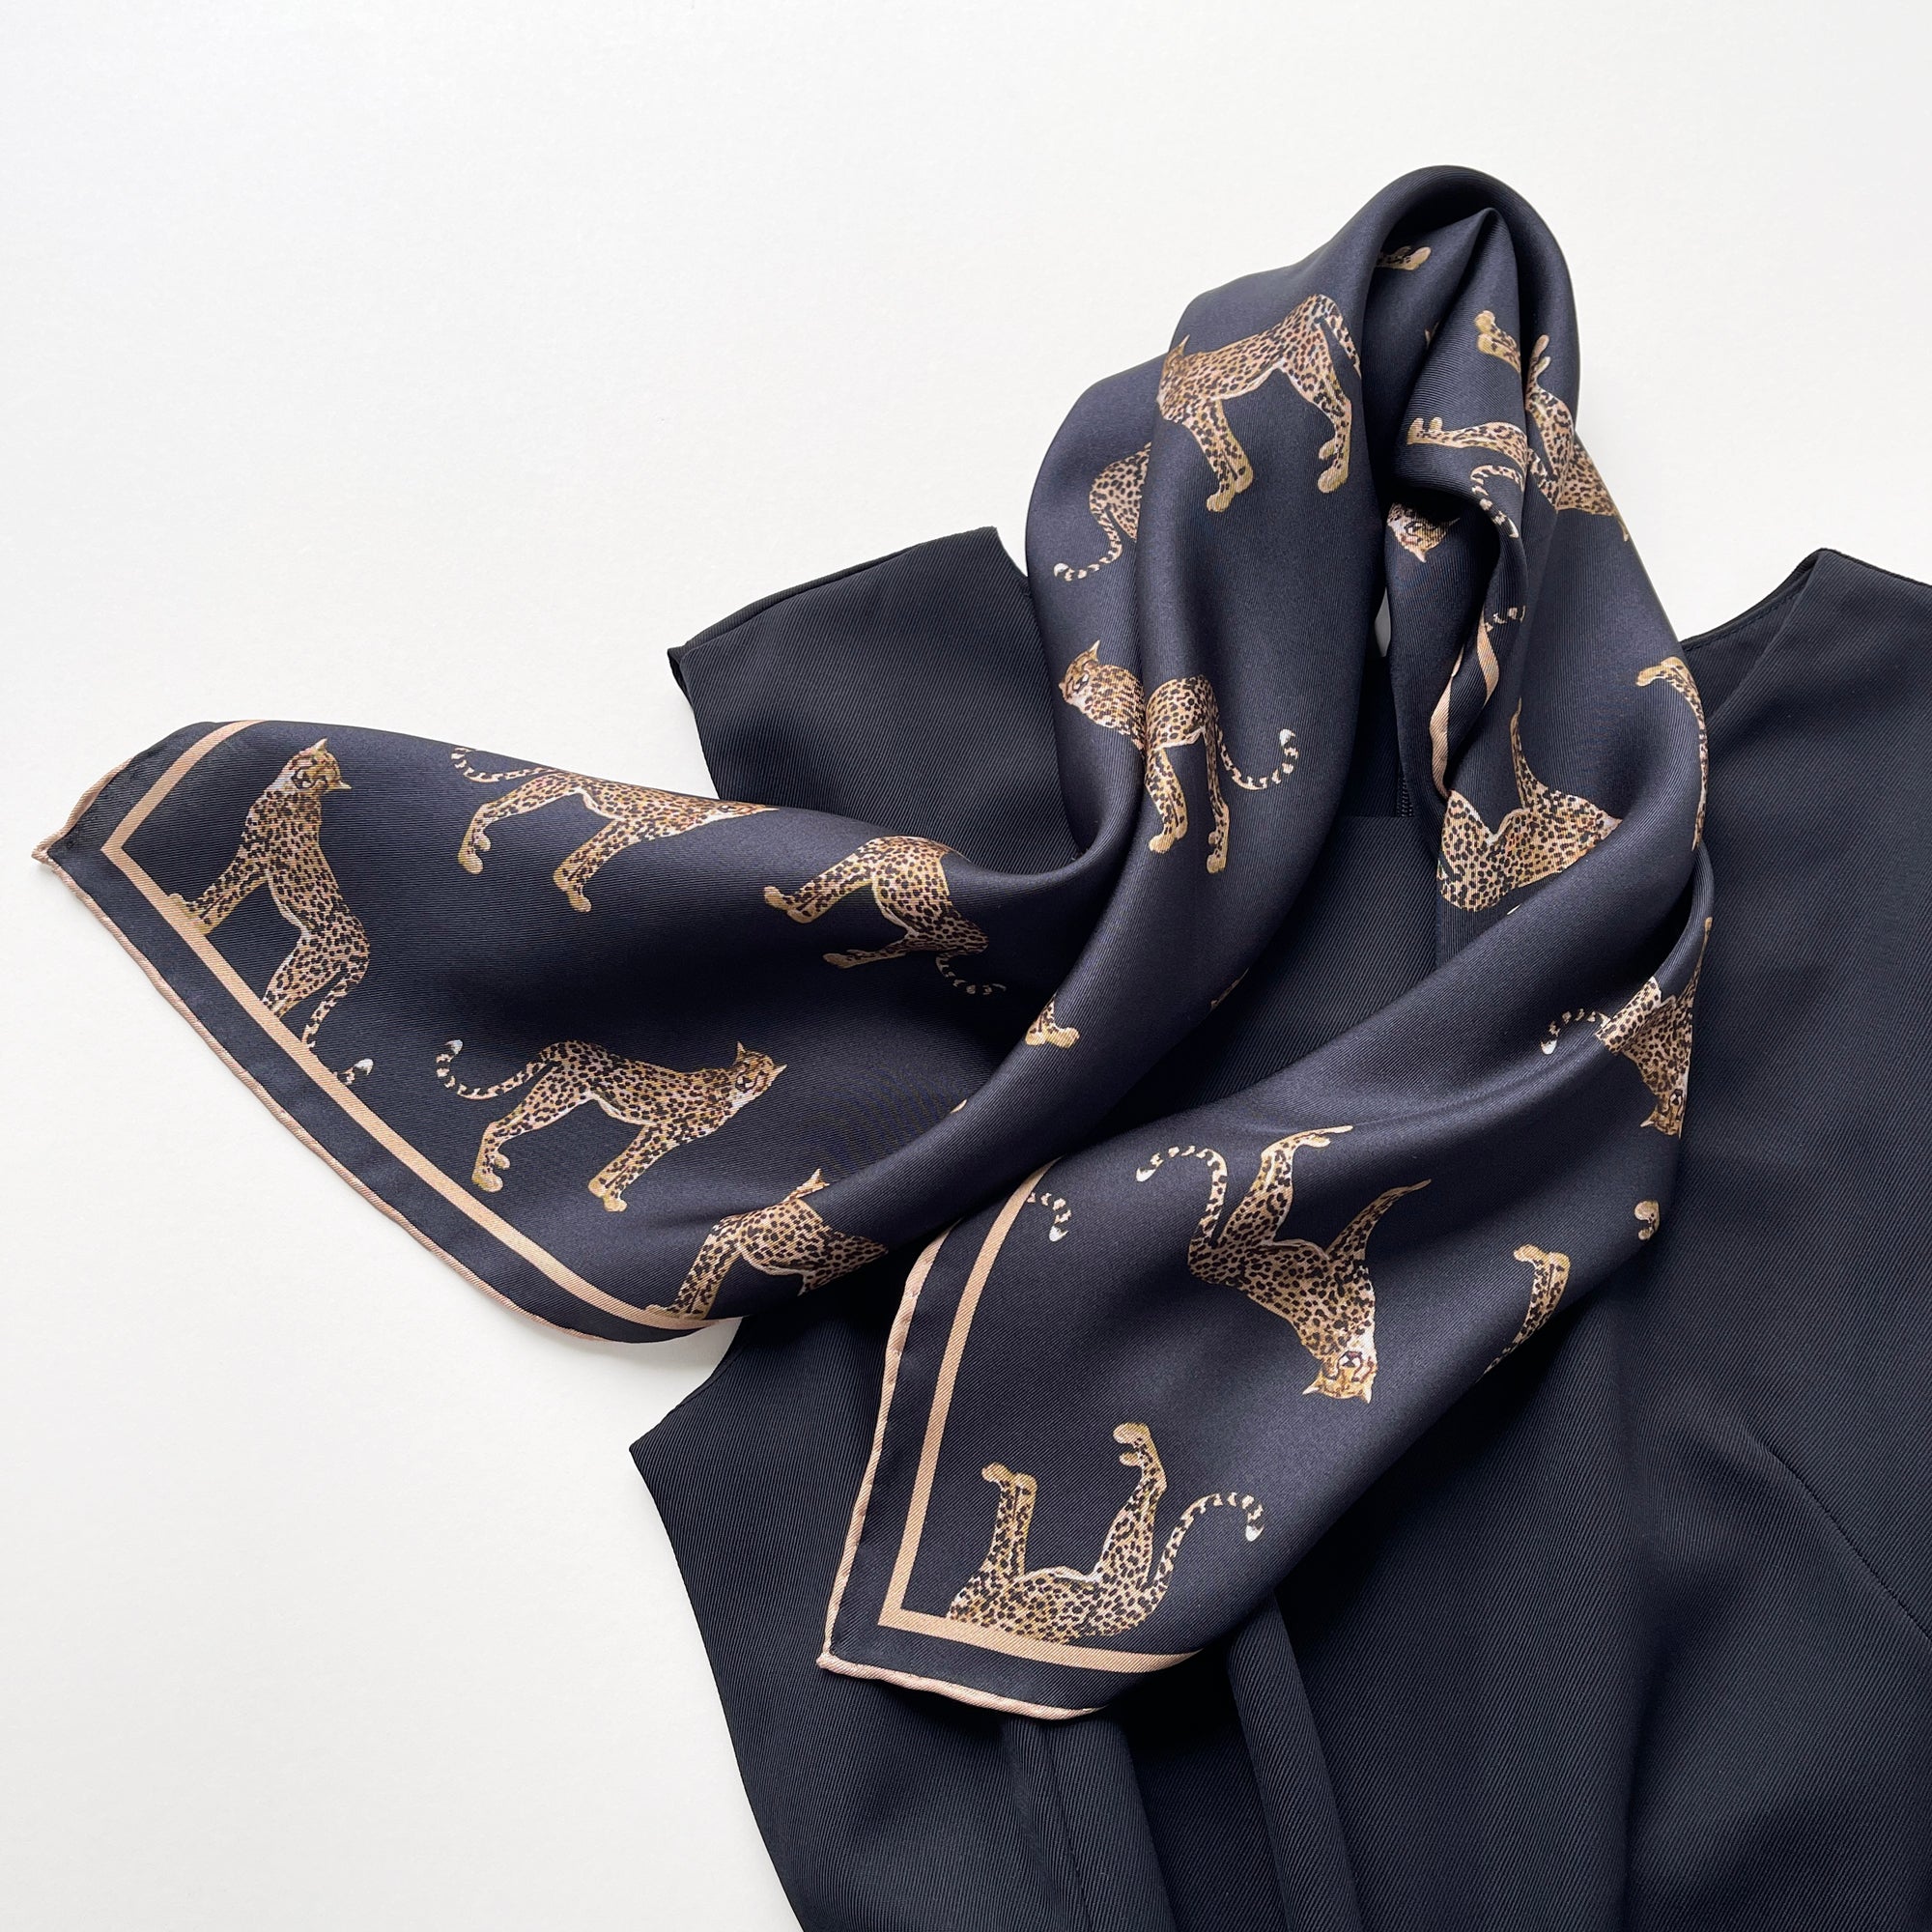 a black base silk scarf featuring leopard print with khaki brown hand-rolled edges, knotted as a neck scarf, paired with a women's black dress